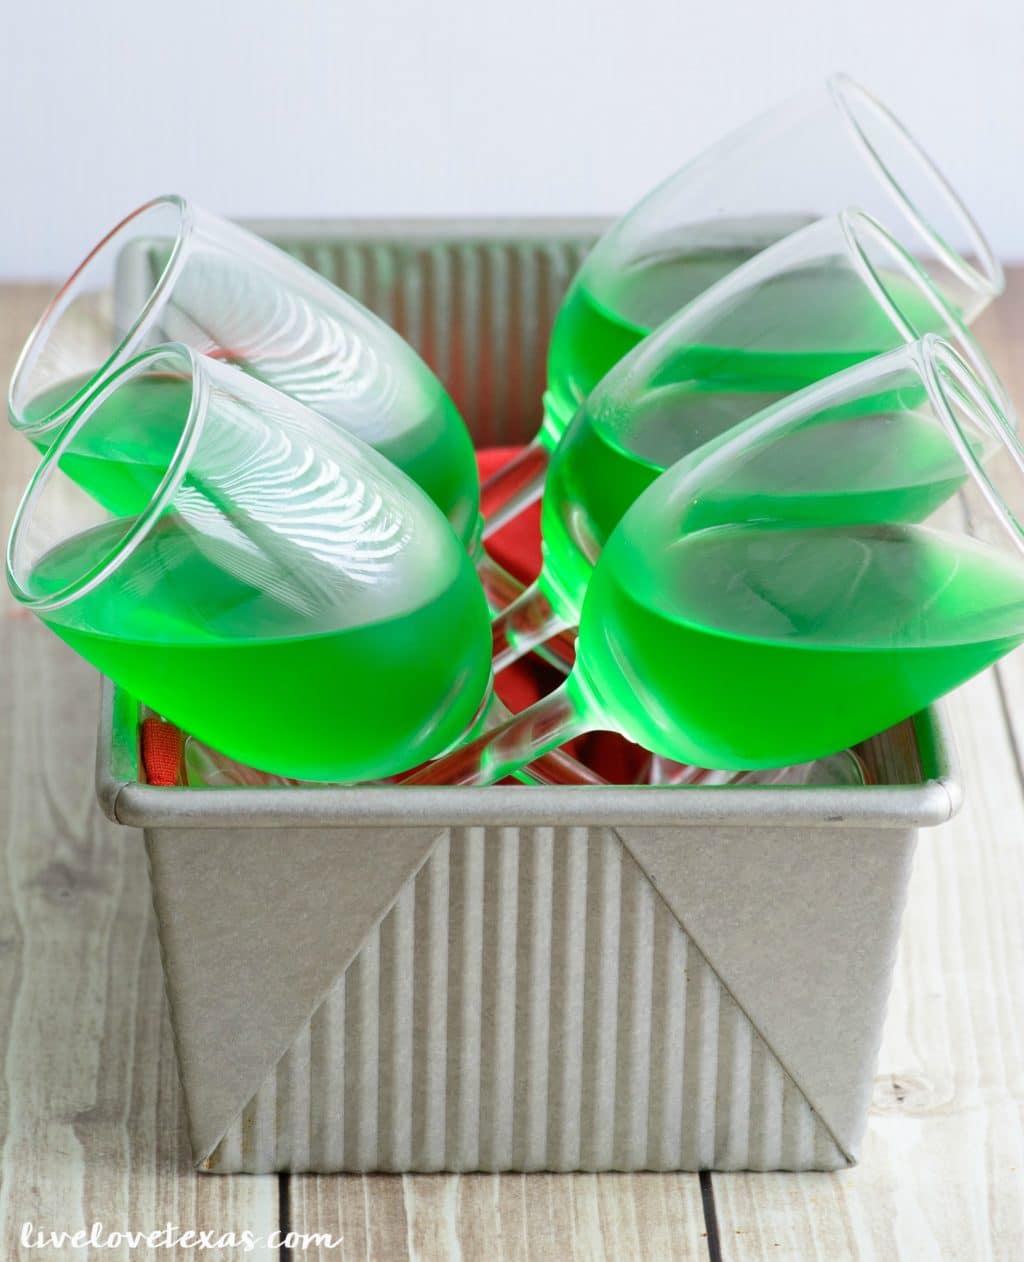 How do you make jello parfait? Lime Jello chilling in fridge at angle in wine glasses.